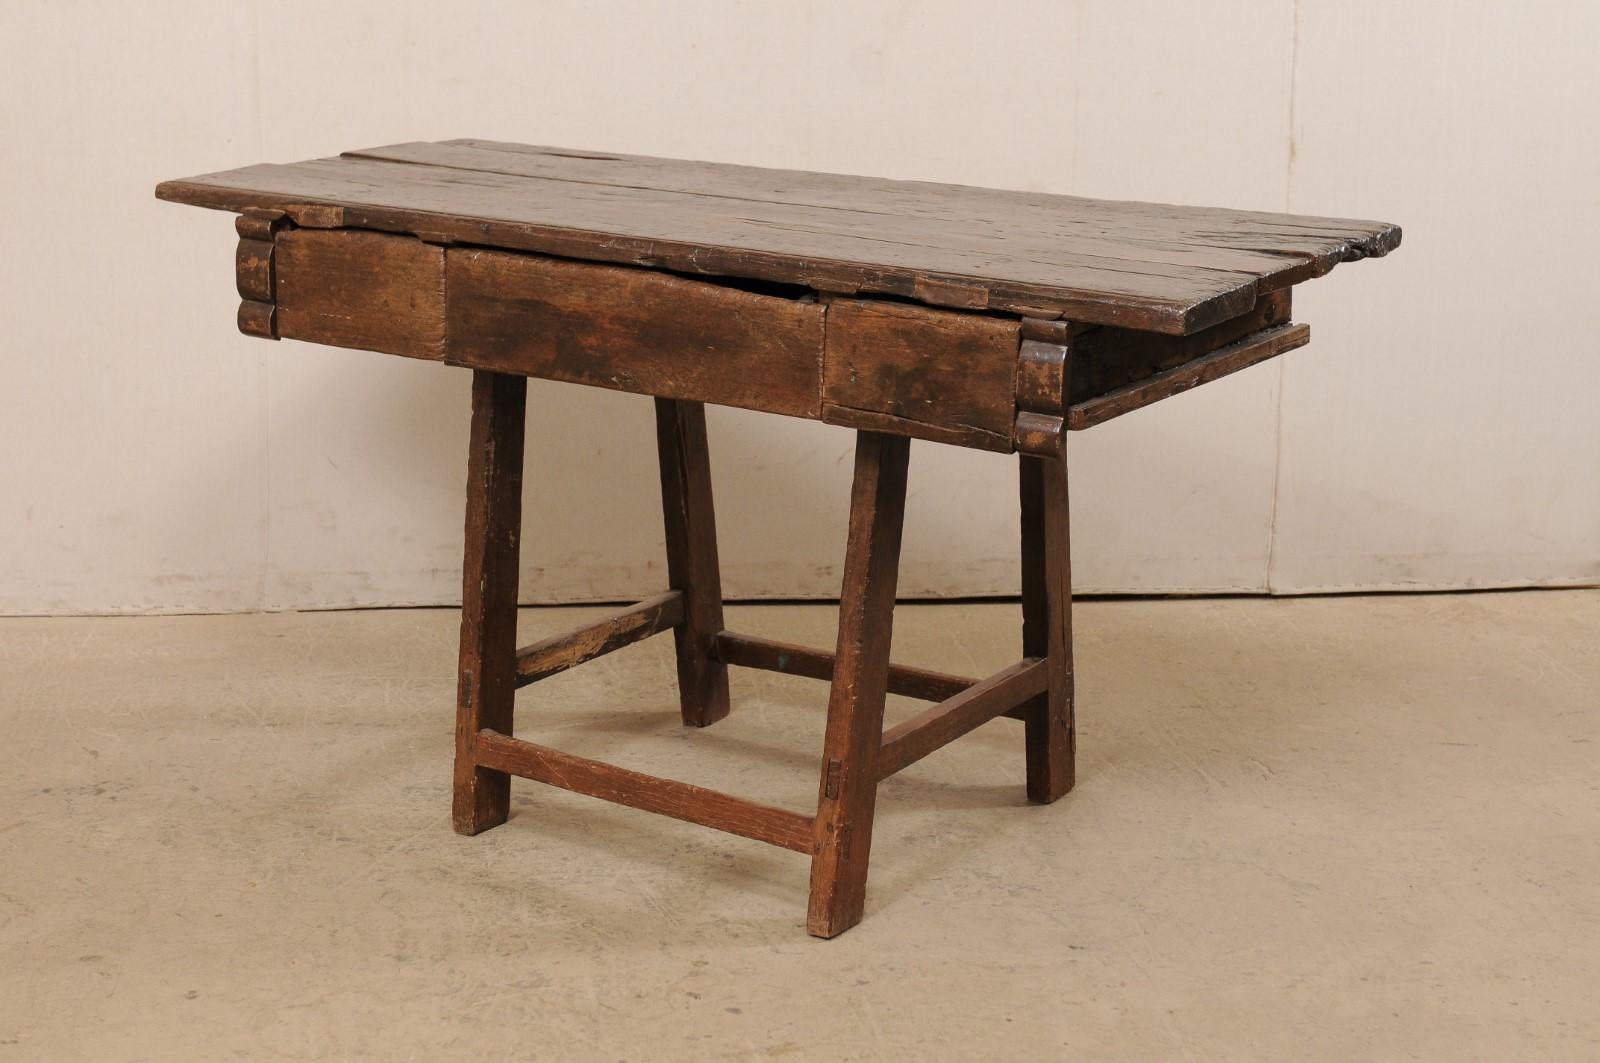 18th C. Brazilian Peroba Wood Table with Drawers, Exquisitely Rustic For Sale 6